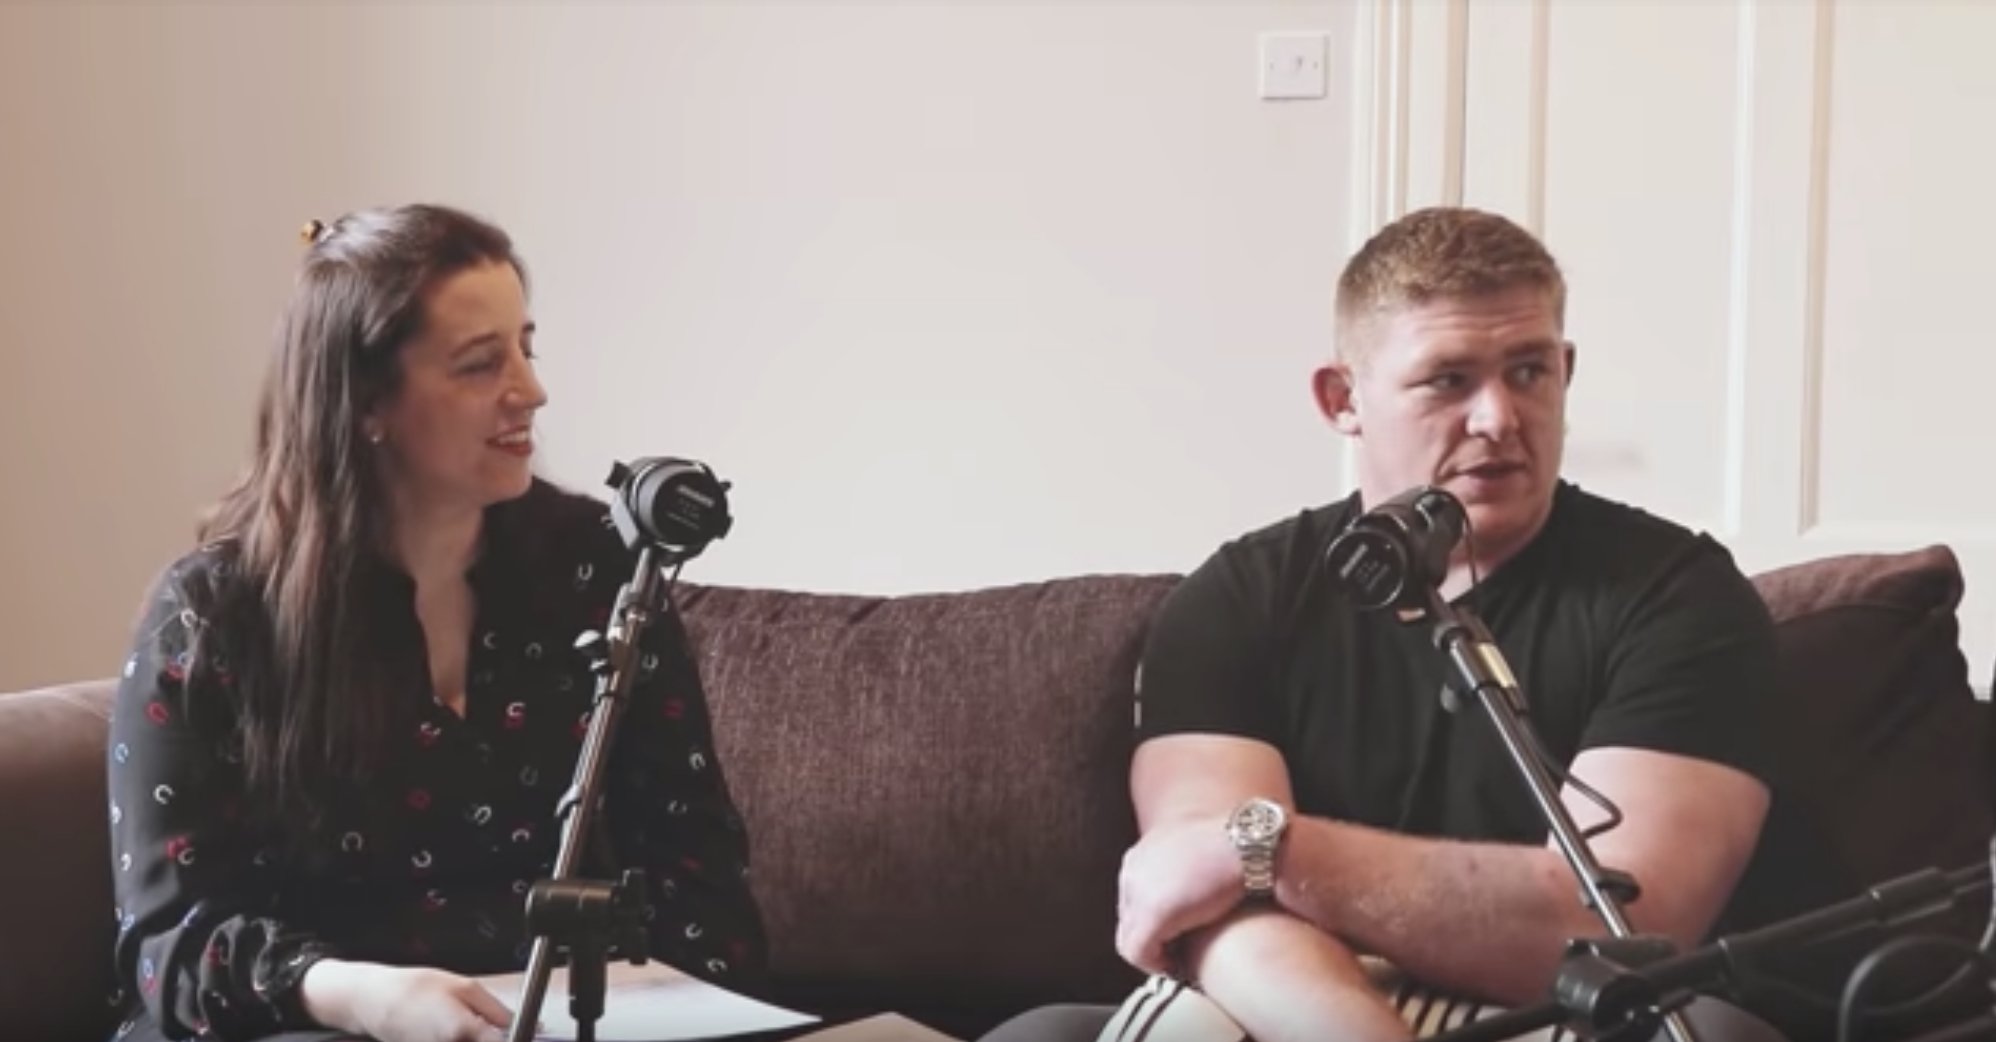 VIDEO: Tadhg Furlong opens up on his "addiction" to potatoes